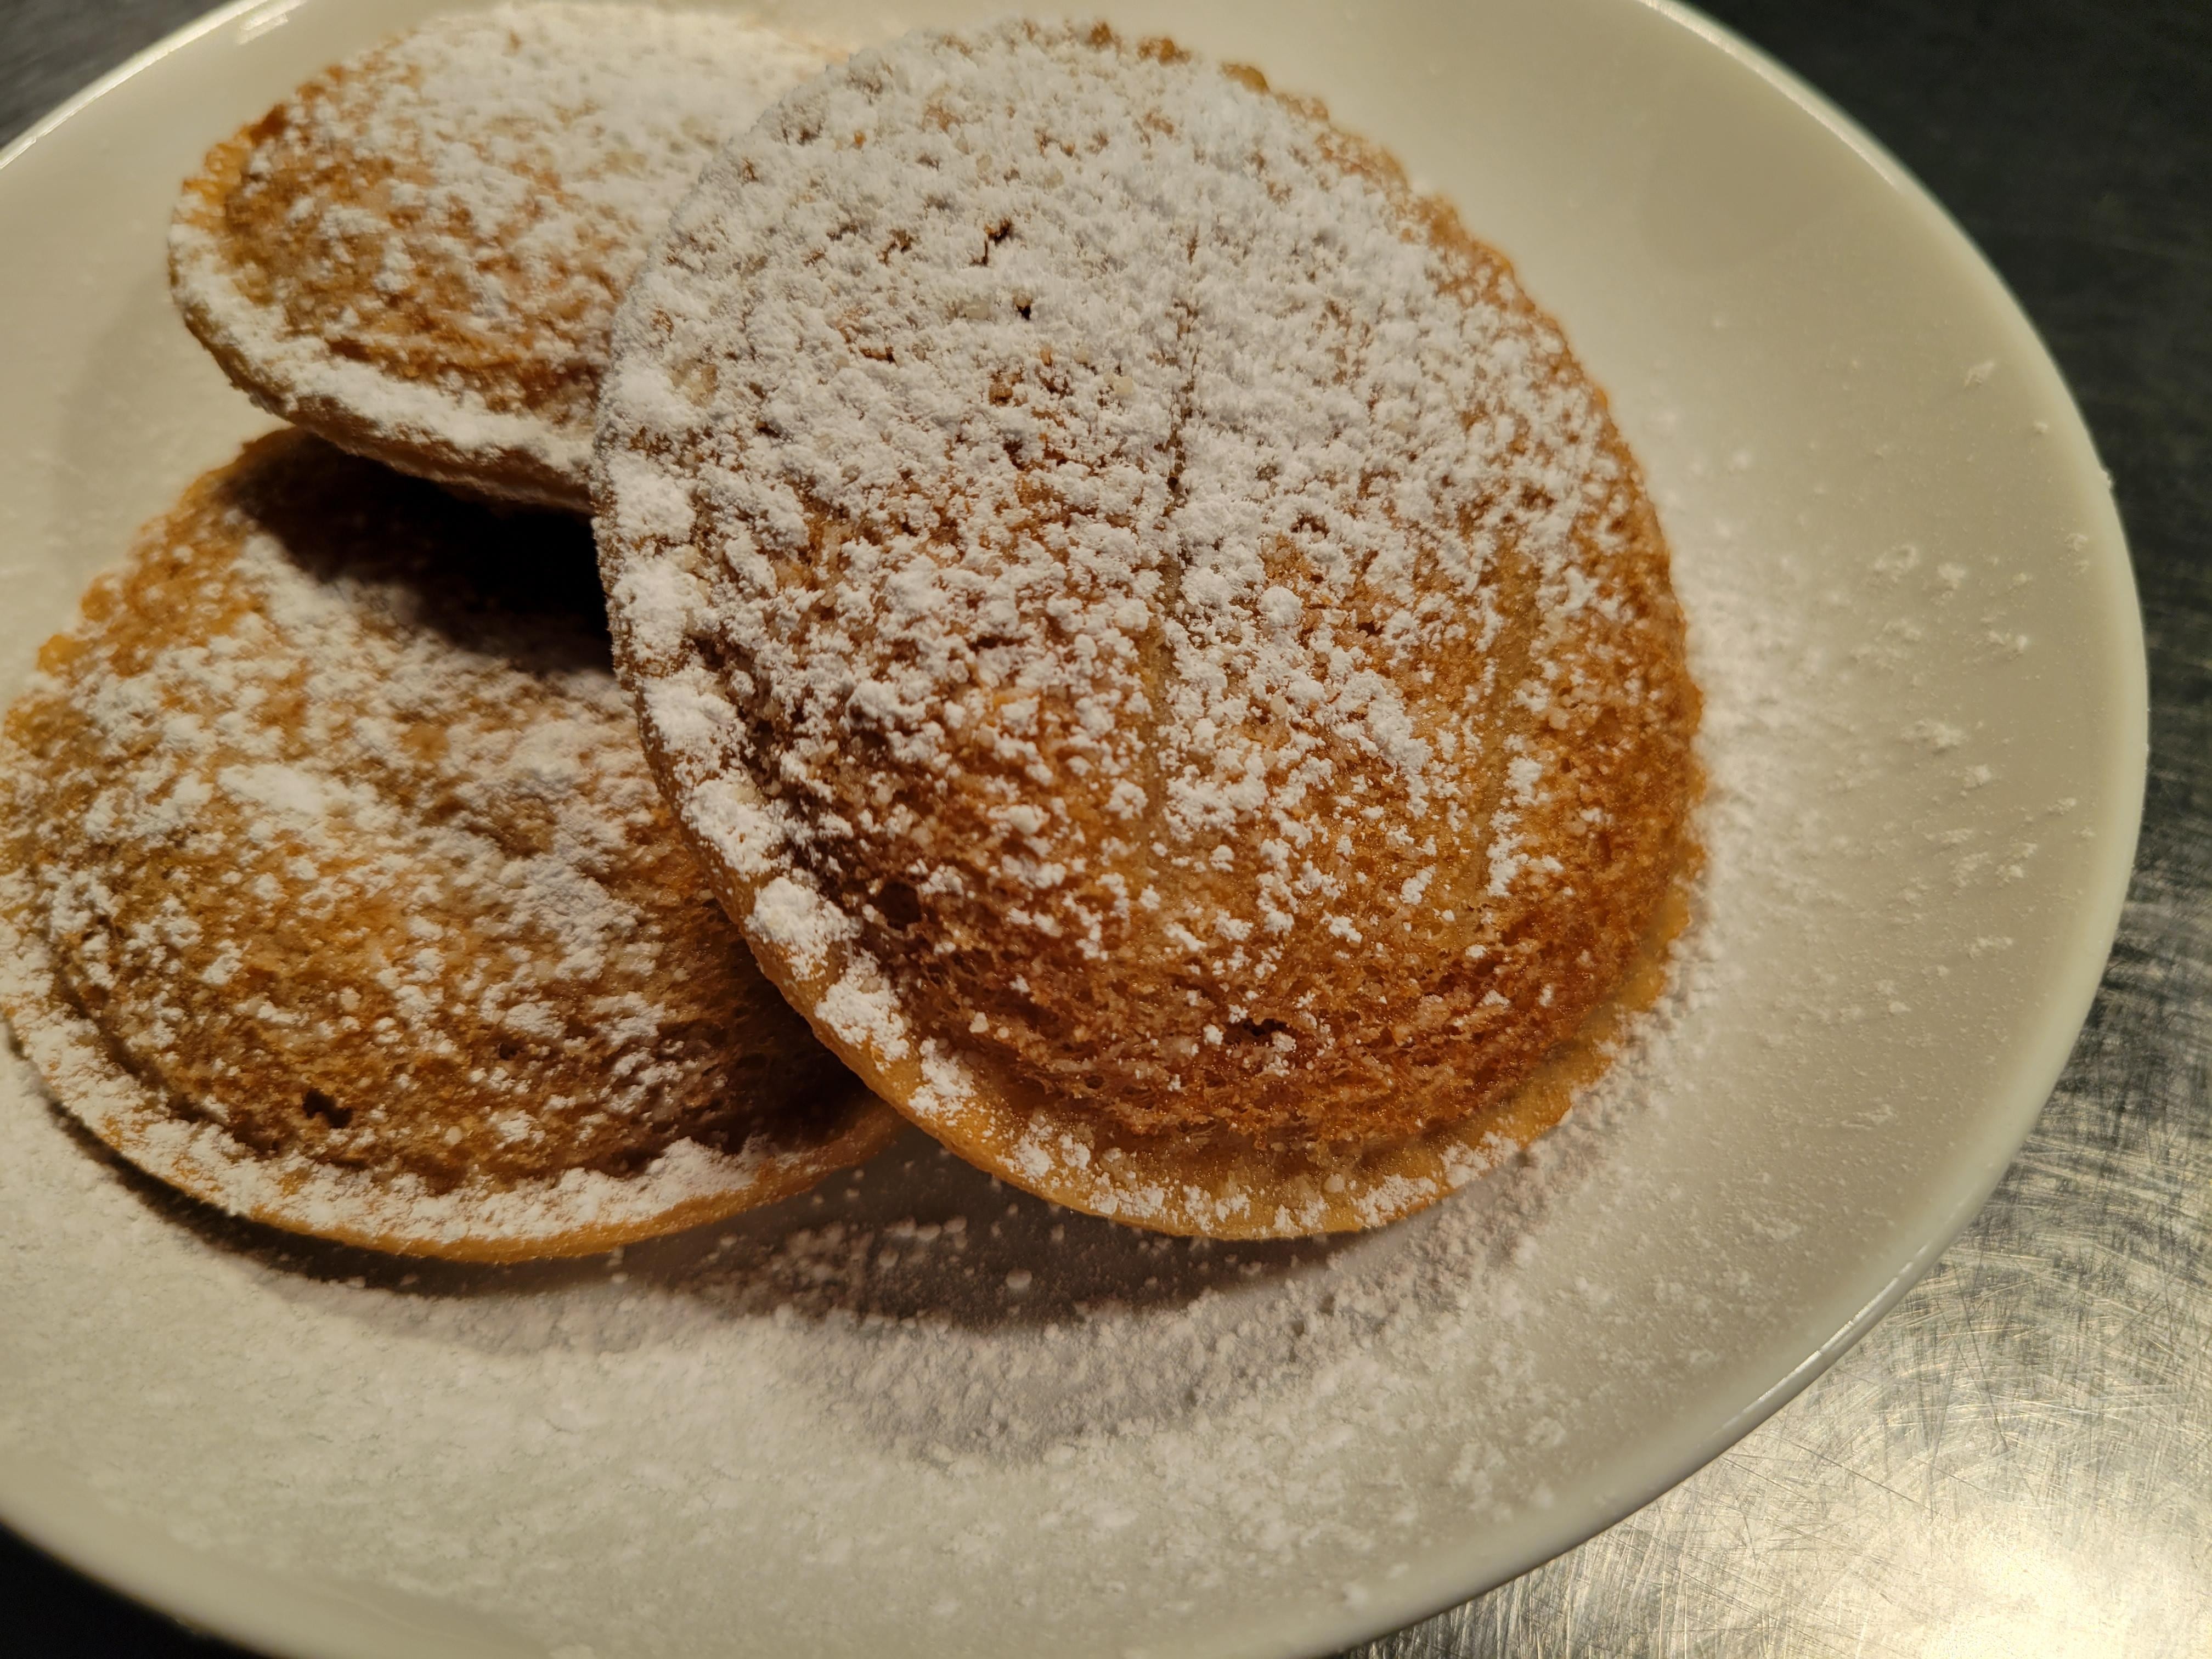 Fried Uncrustables (3) Grape Jelly, Powdered Sugar